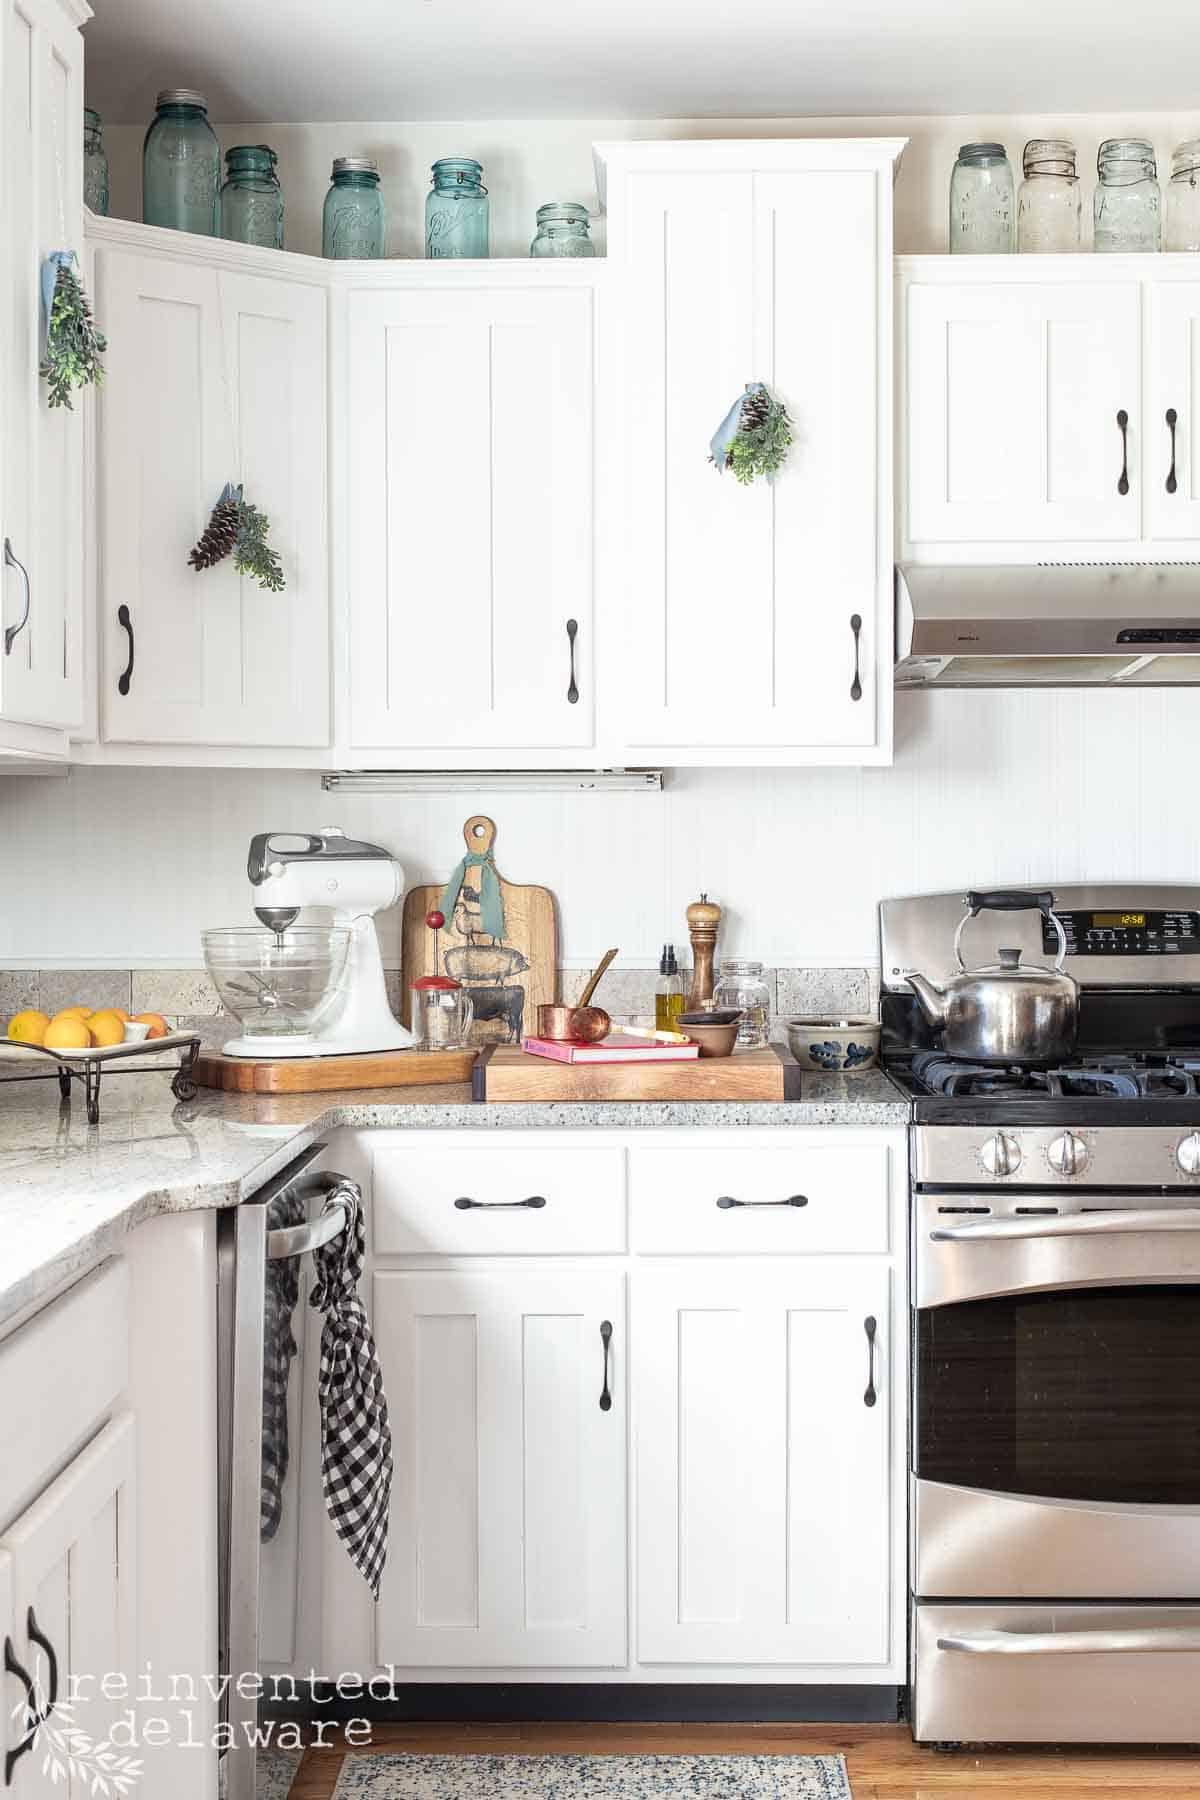 white painted kitchen cabinets with pine cone ornaments on the door for handmade Christmas decor